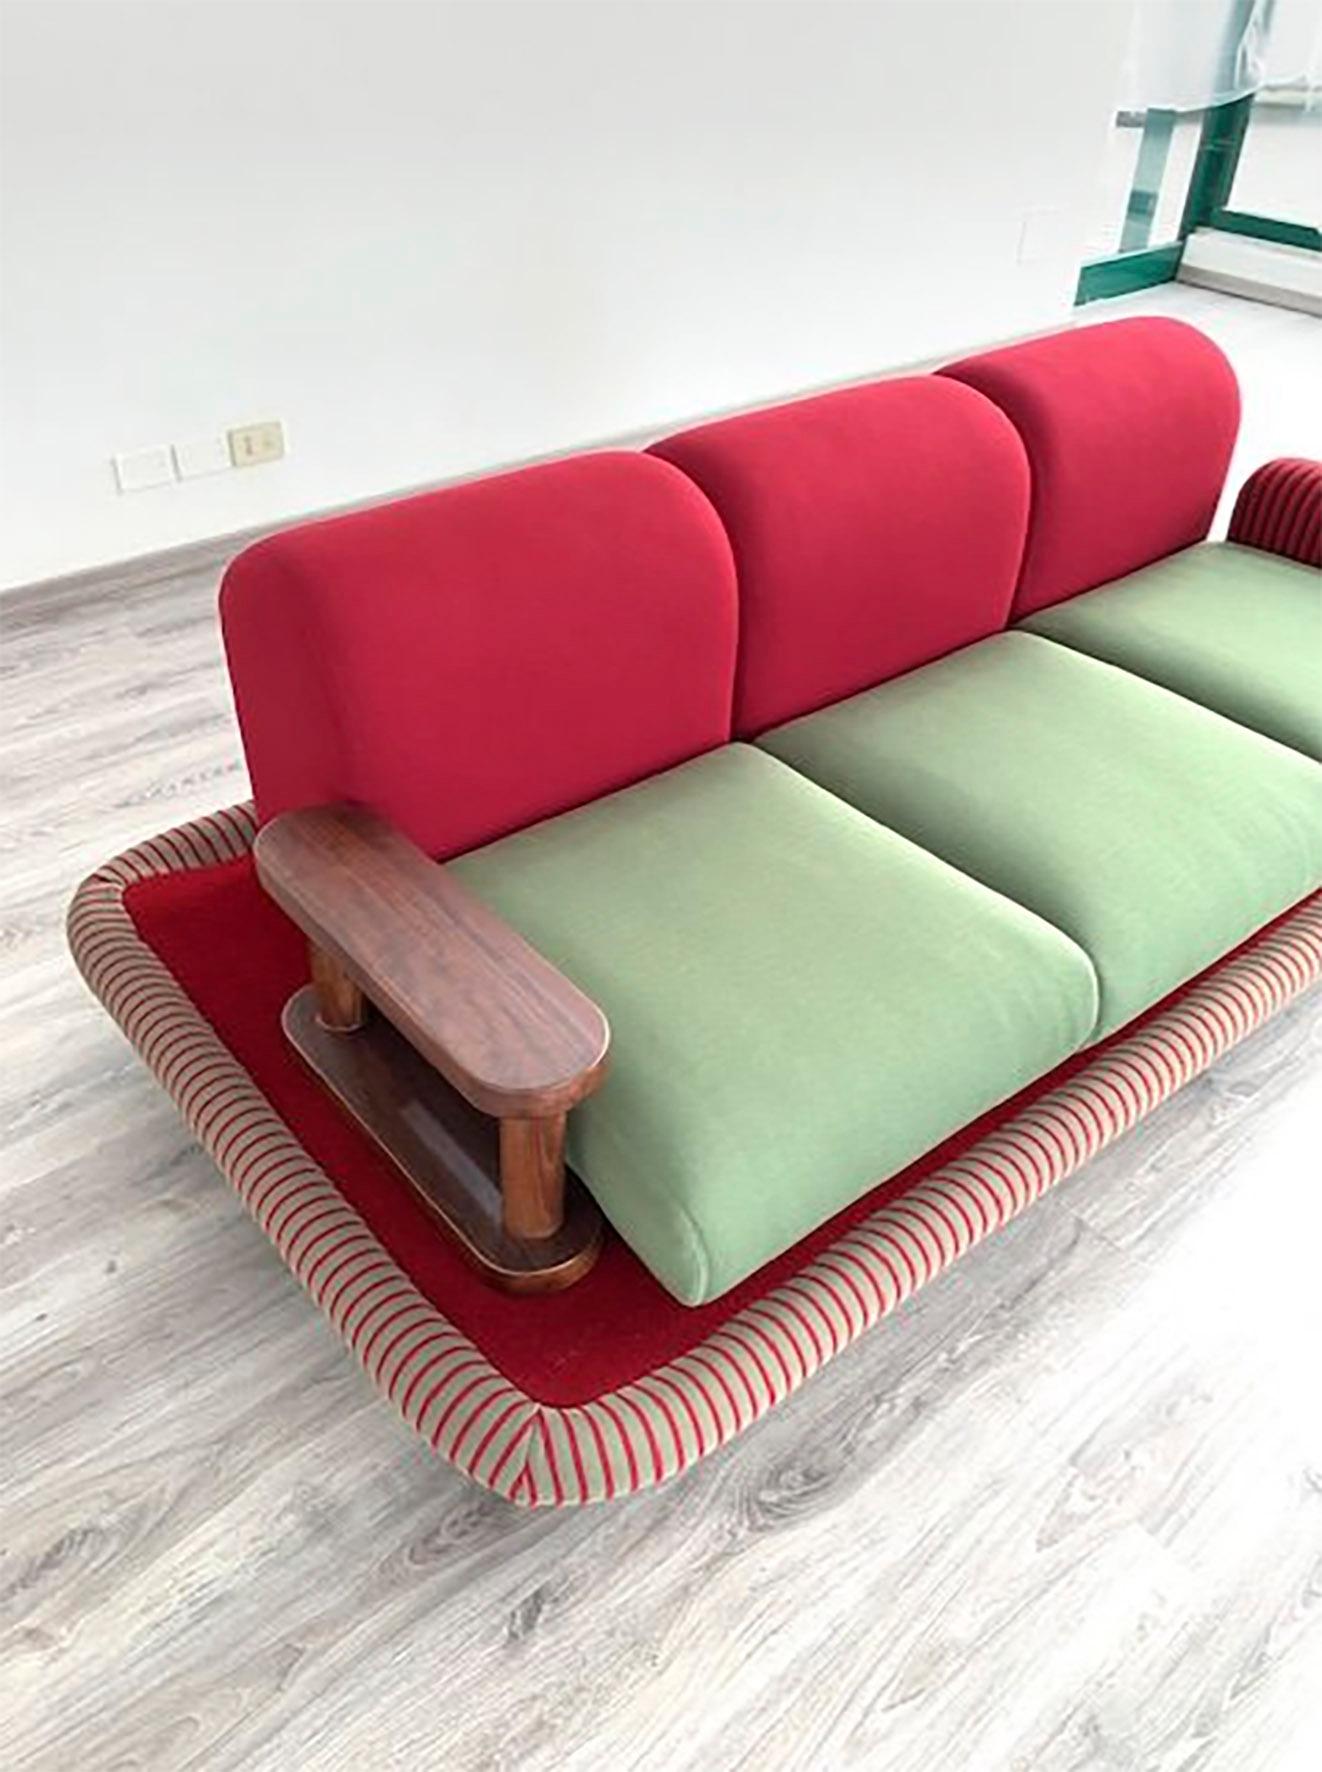 flyrugs.com couch